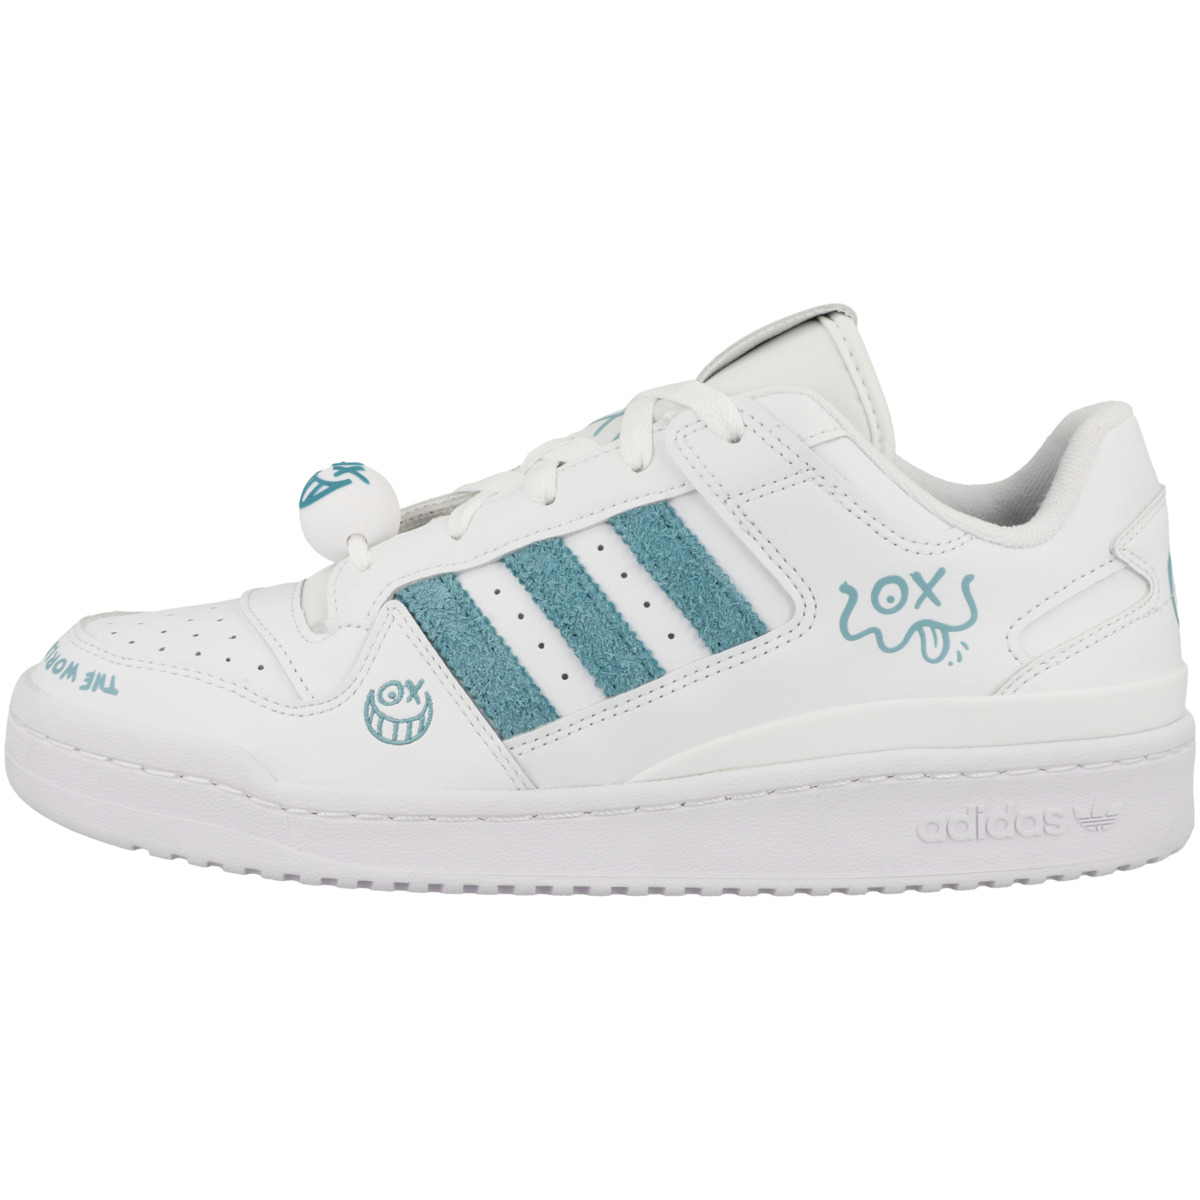 Adidas Forum Low Classic X André Saraiva Sneaker weiss